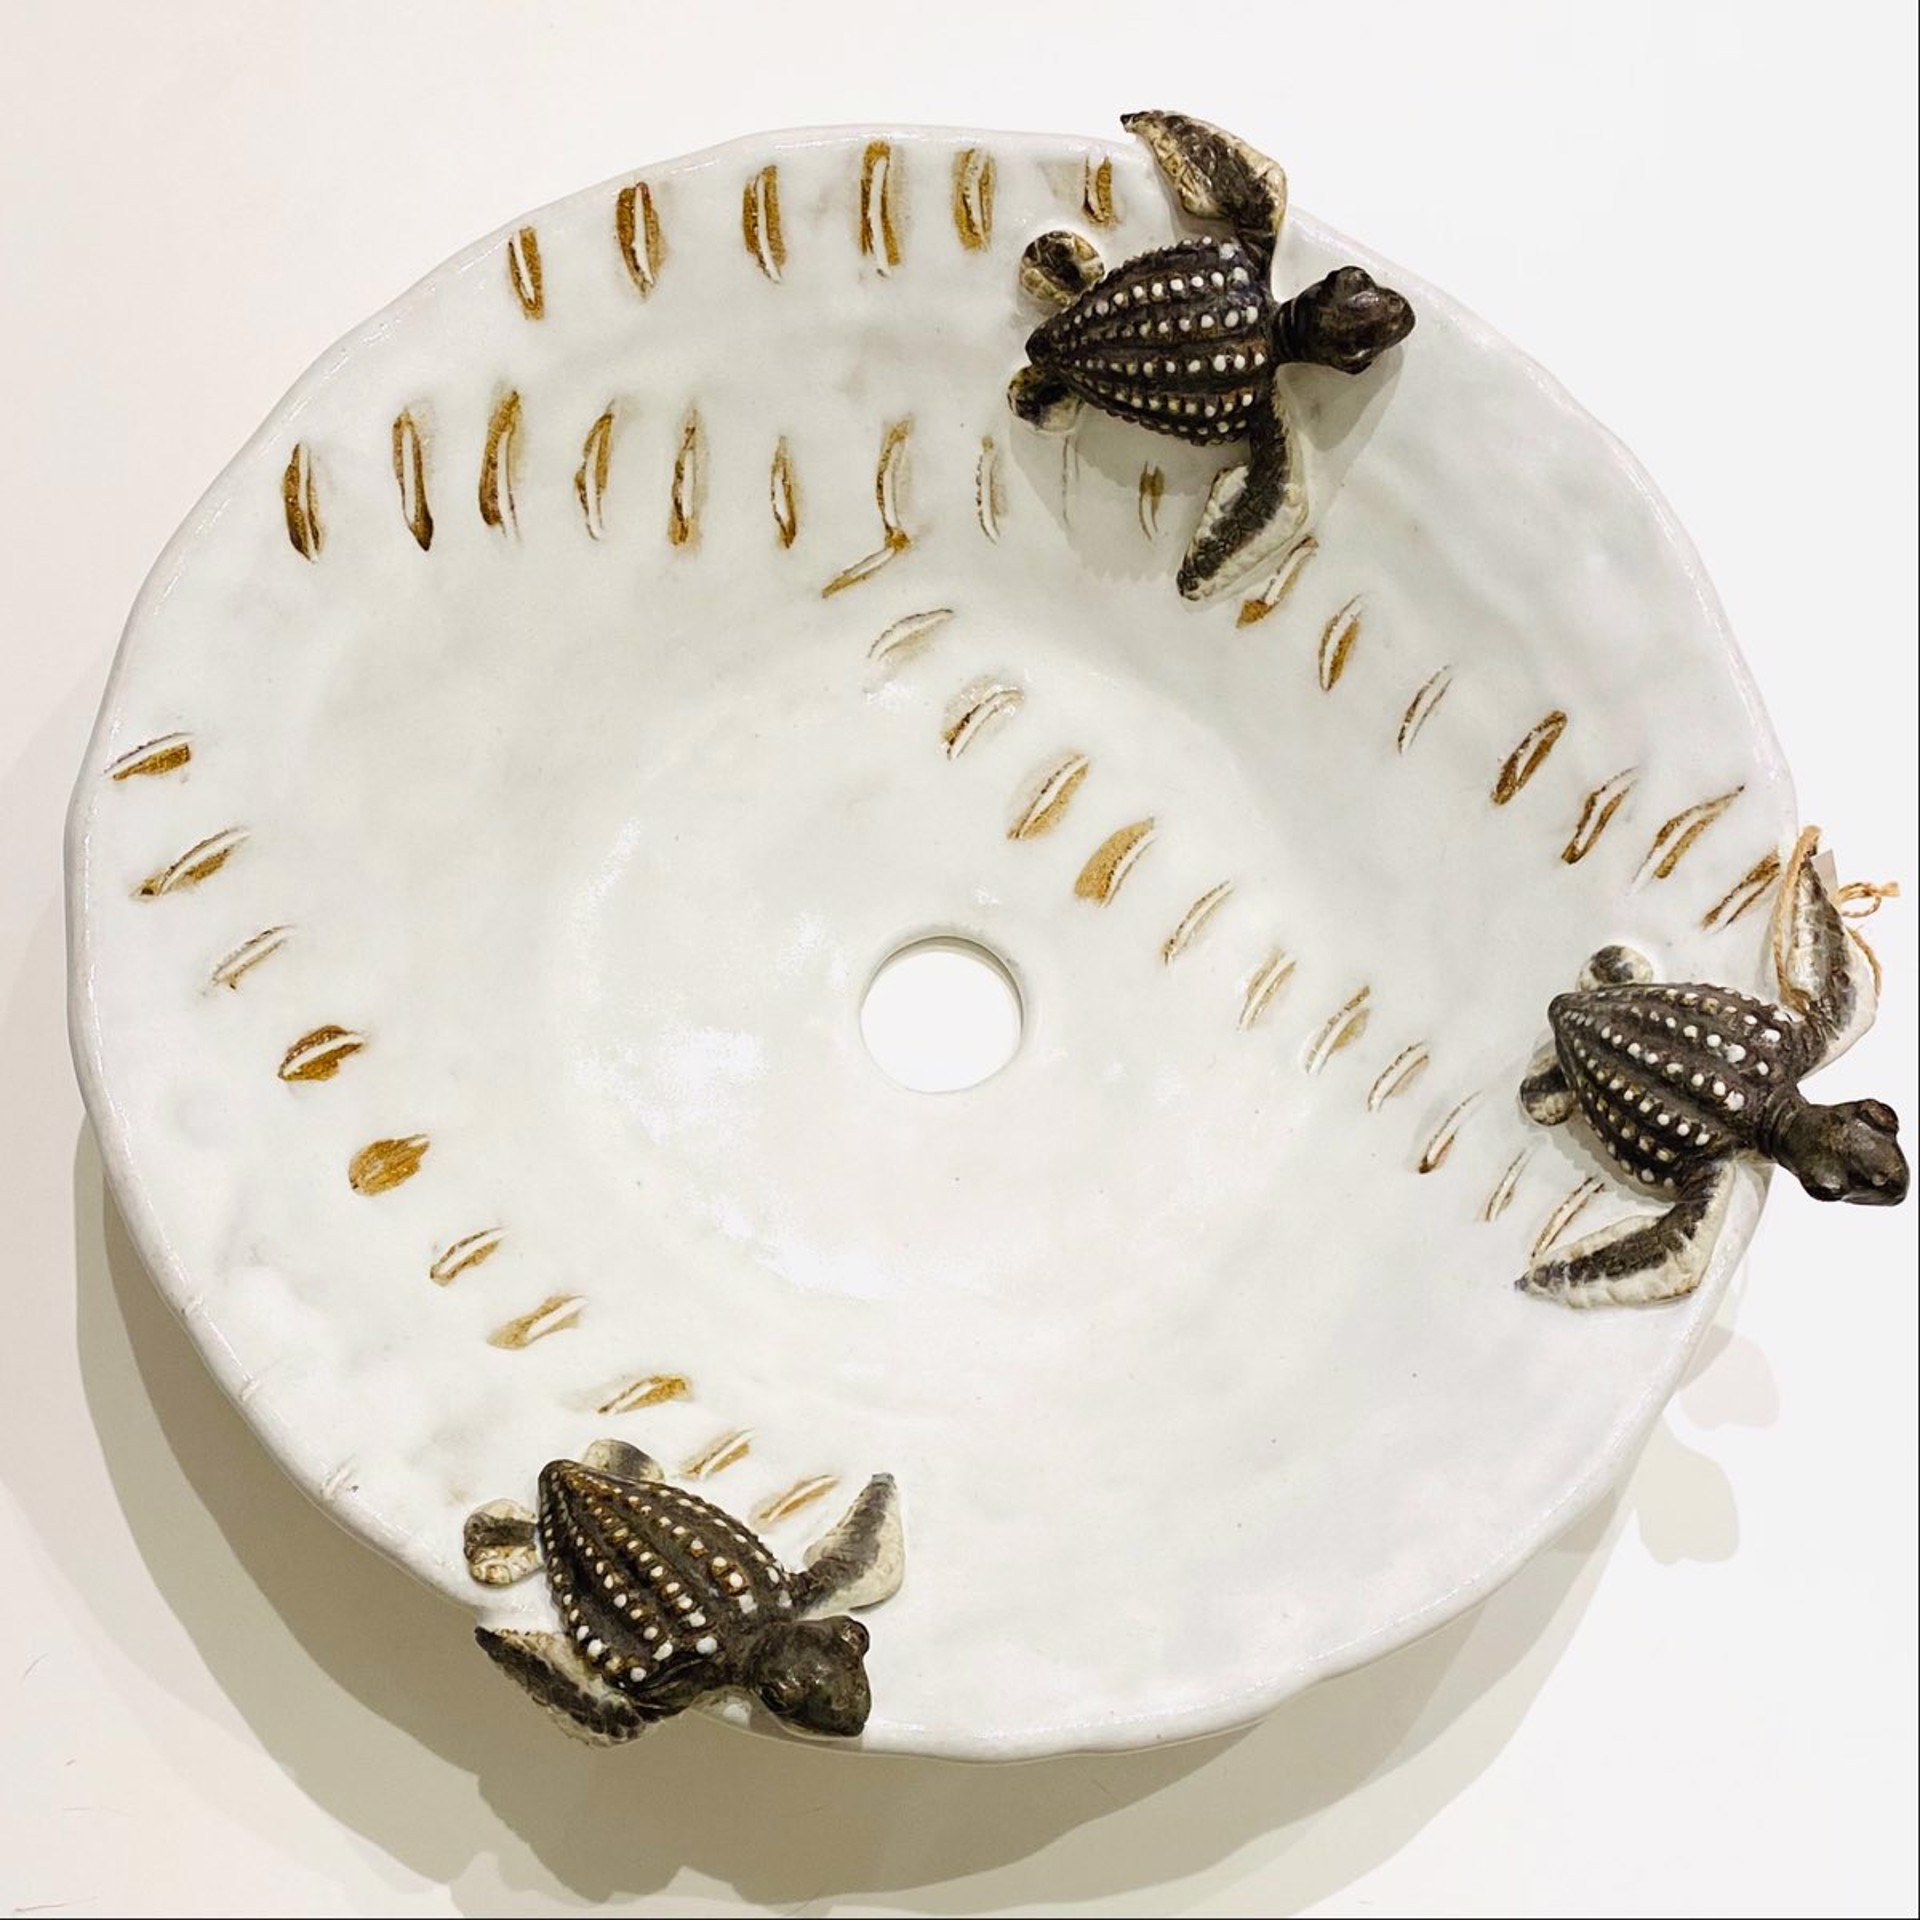 SG22-108 Leatherback Turtle Hatchlings Sink (White) by Shayne Greco